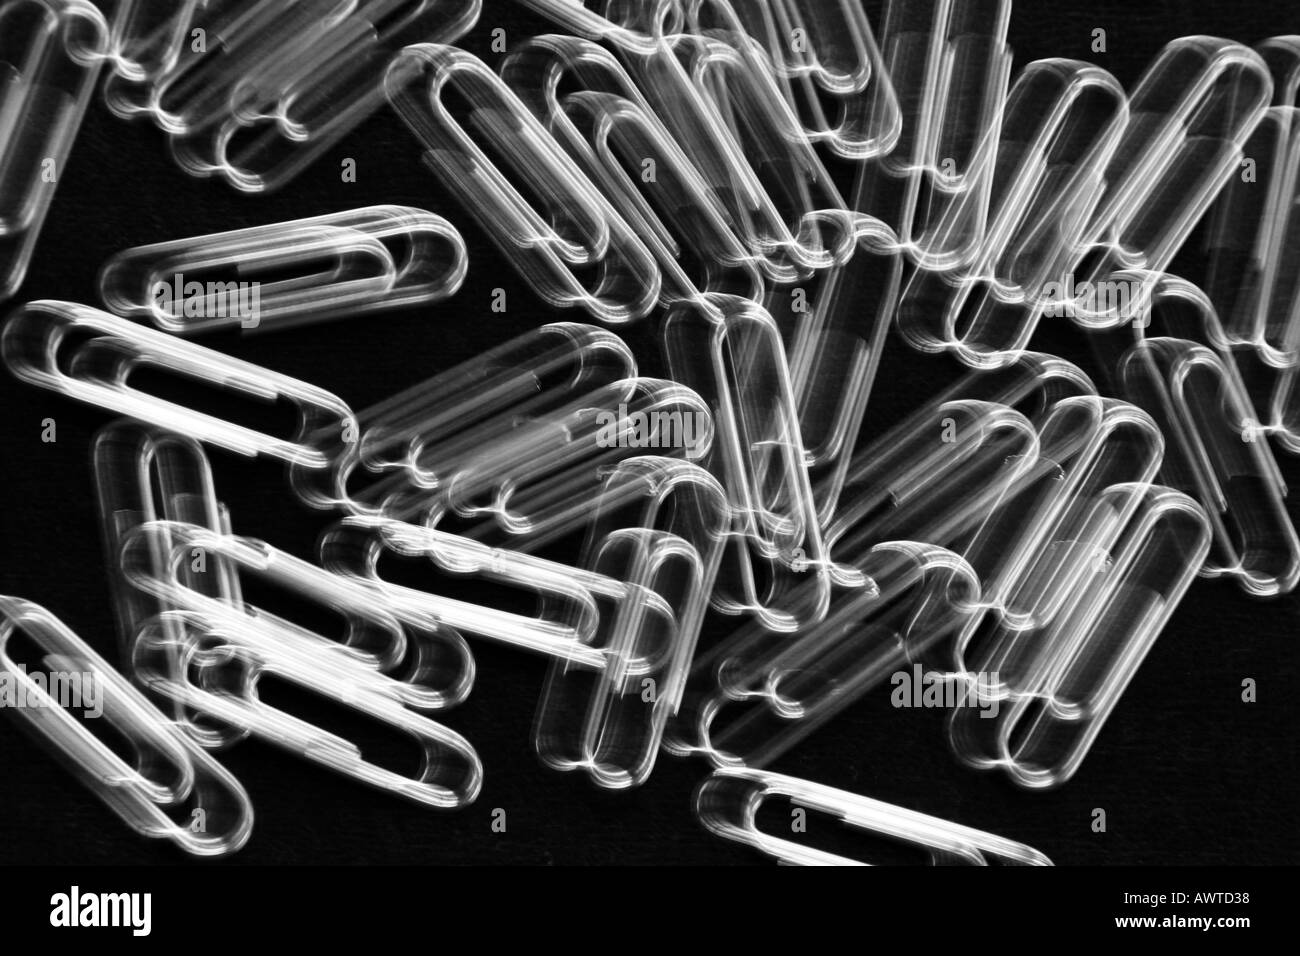 Blurred silver paperclips Stock Photo